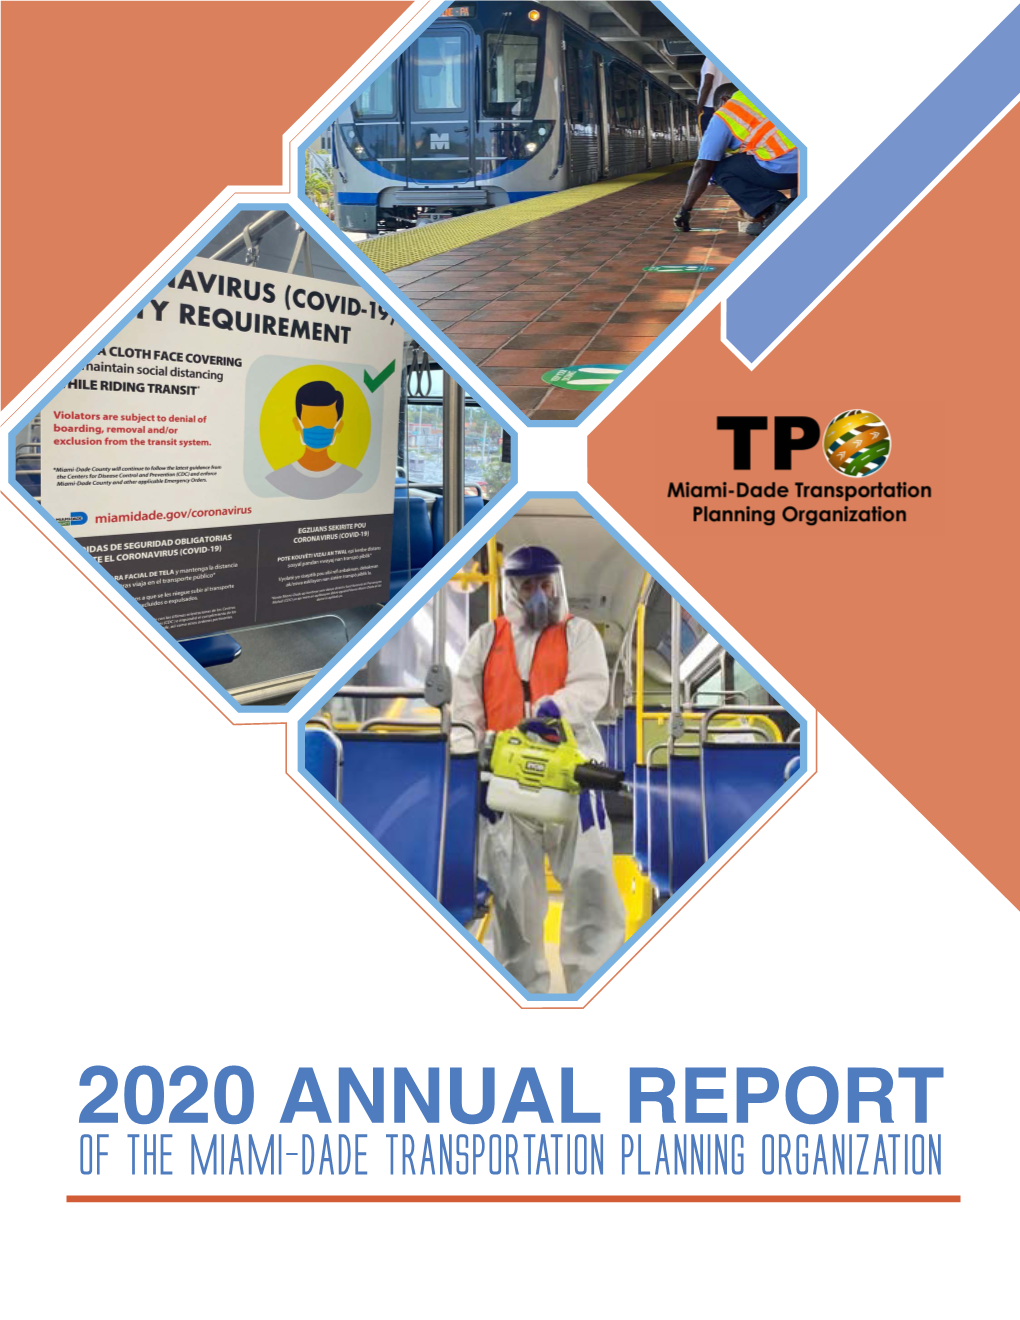 2020 ANNUAL REPORT of the Miami-Dade Transportation Planning Organization MIAMI-DADE TRANSPORTATION PLANNING ORGANIZATION GOVERNING BOARD